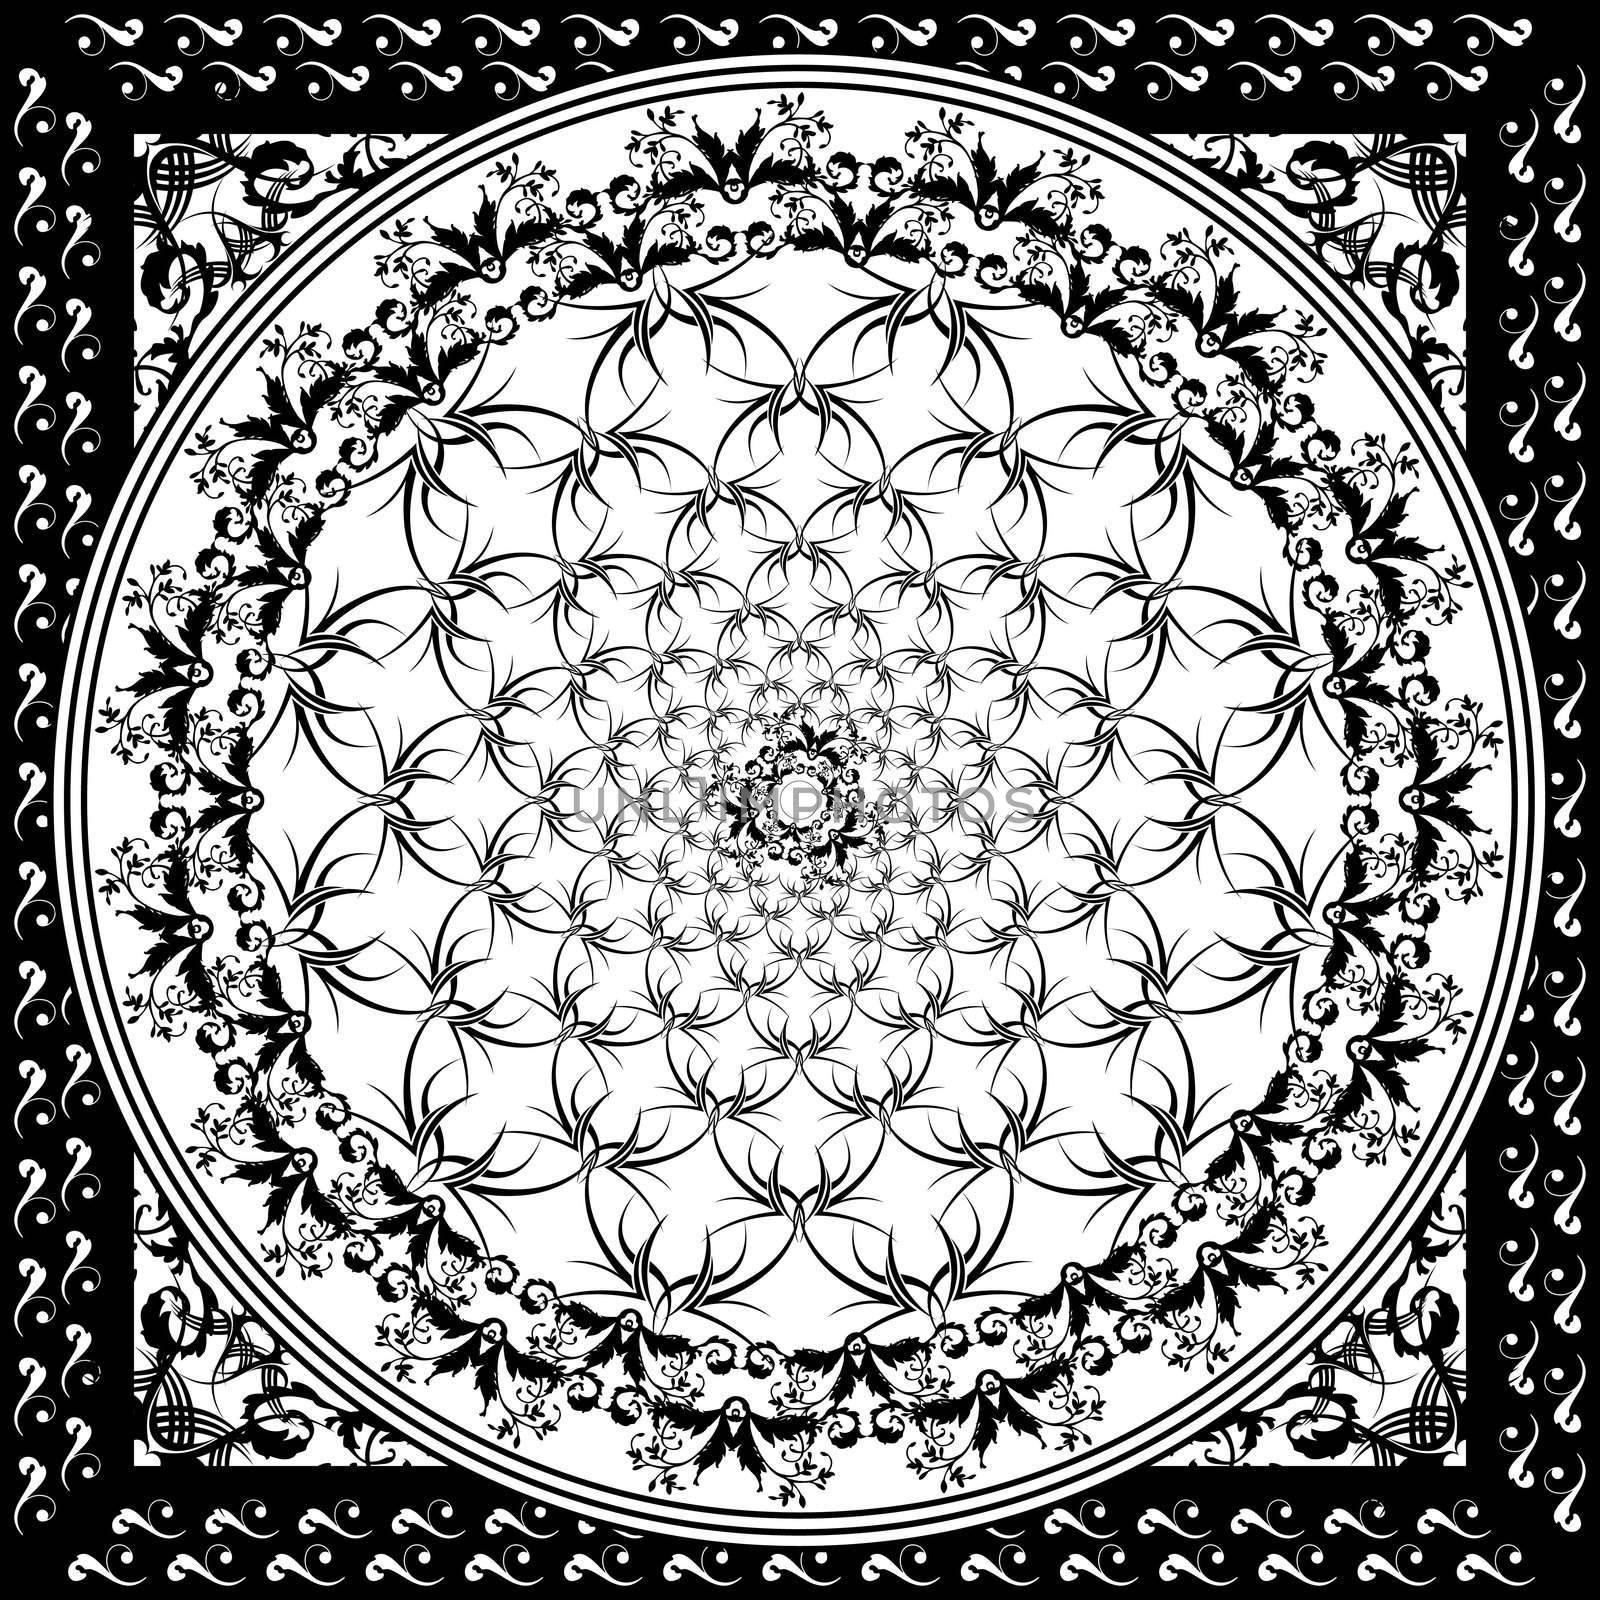 black and white stark seamless repeating gothic tile